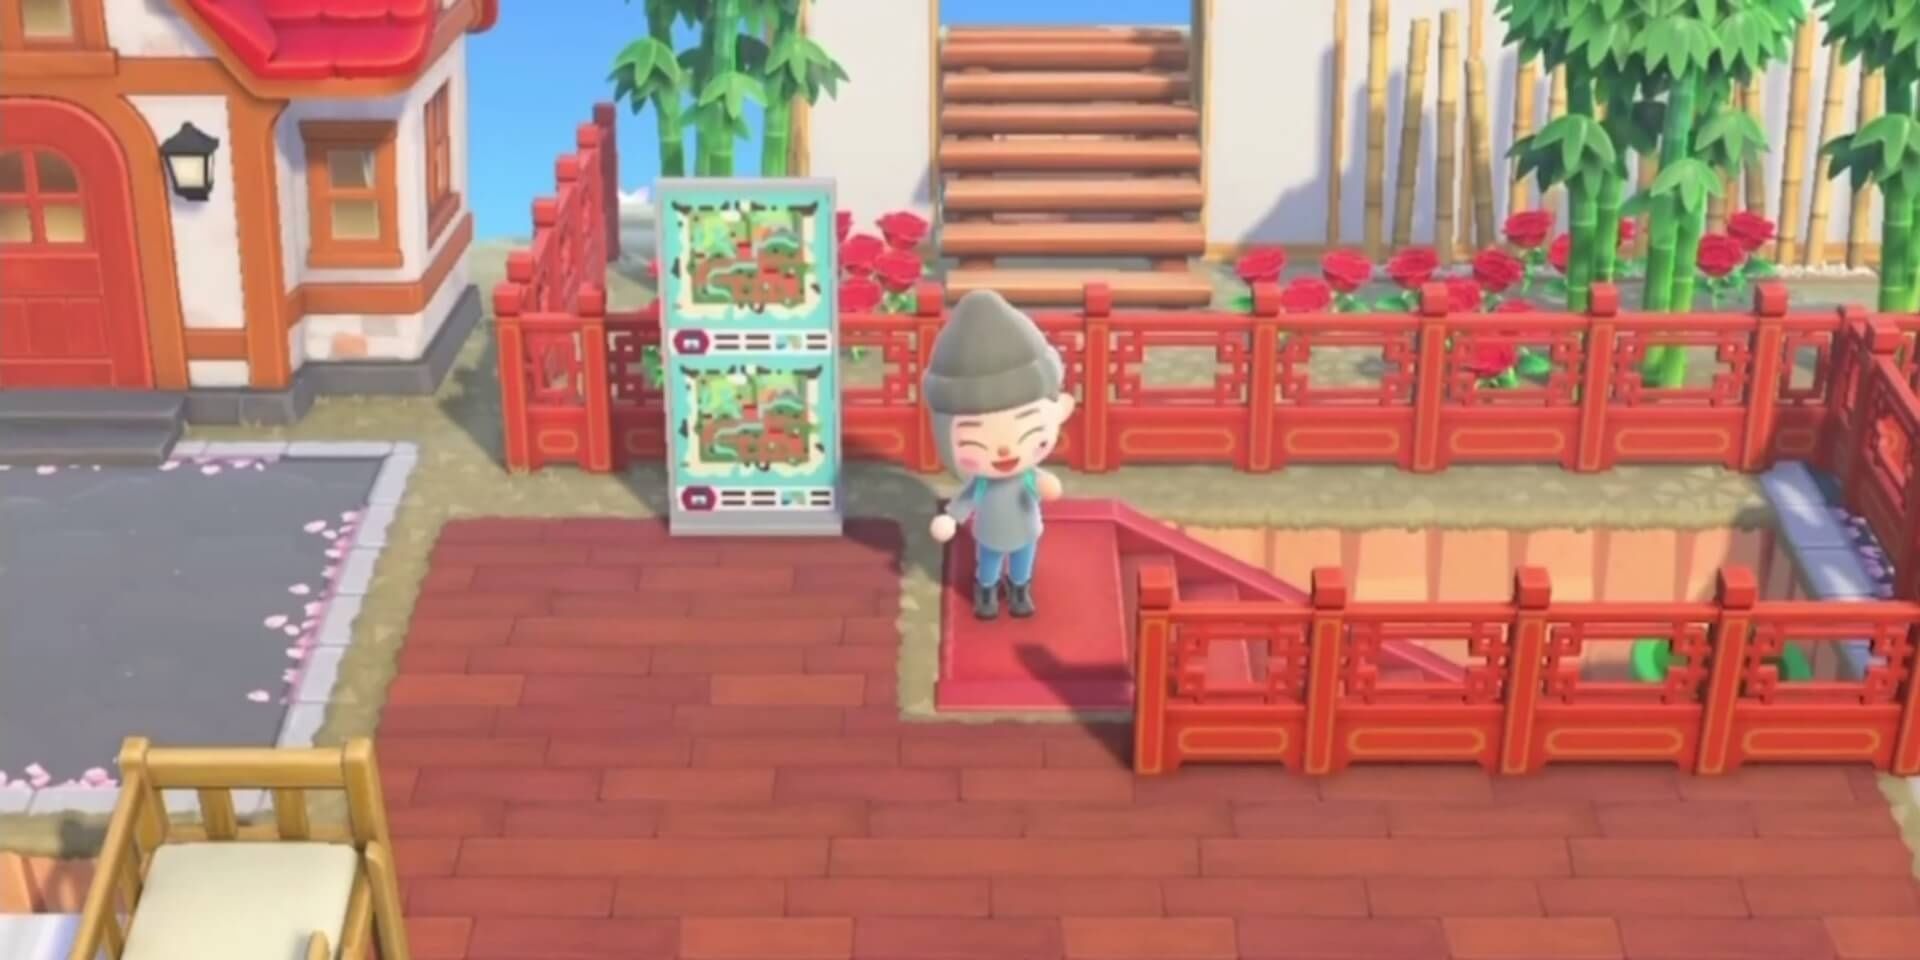 A subway build in Animal Crossing New Horizons